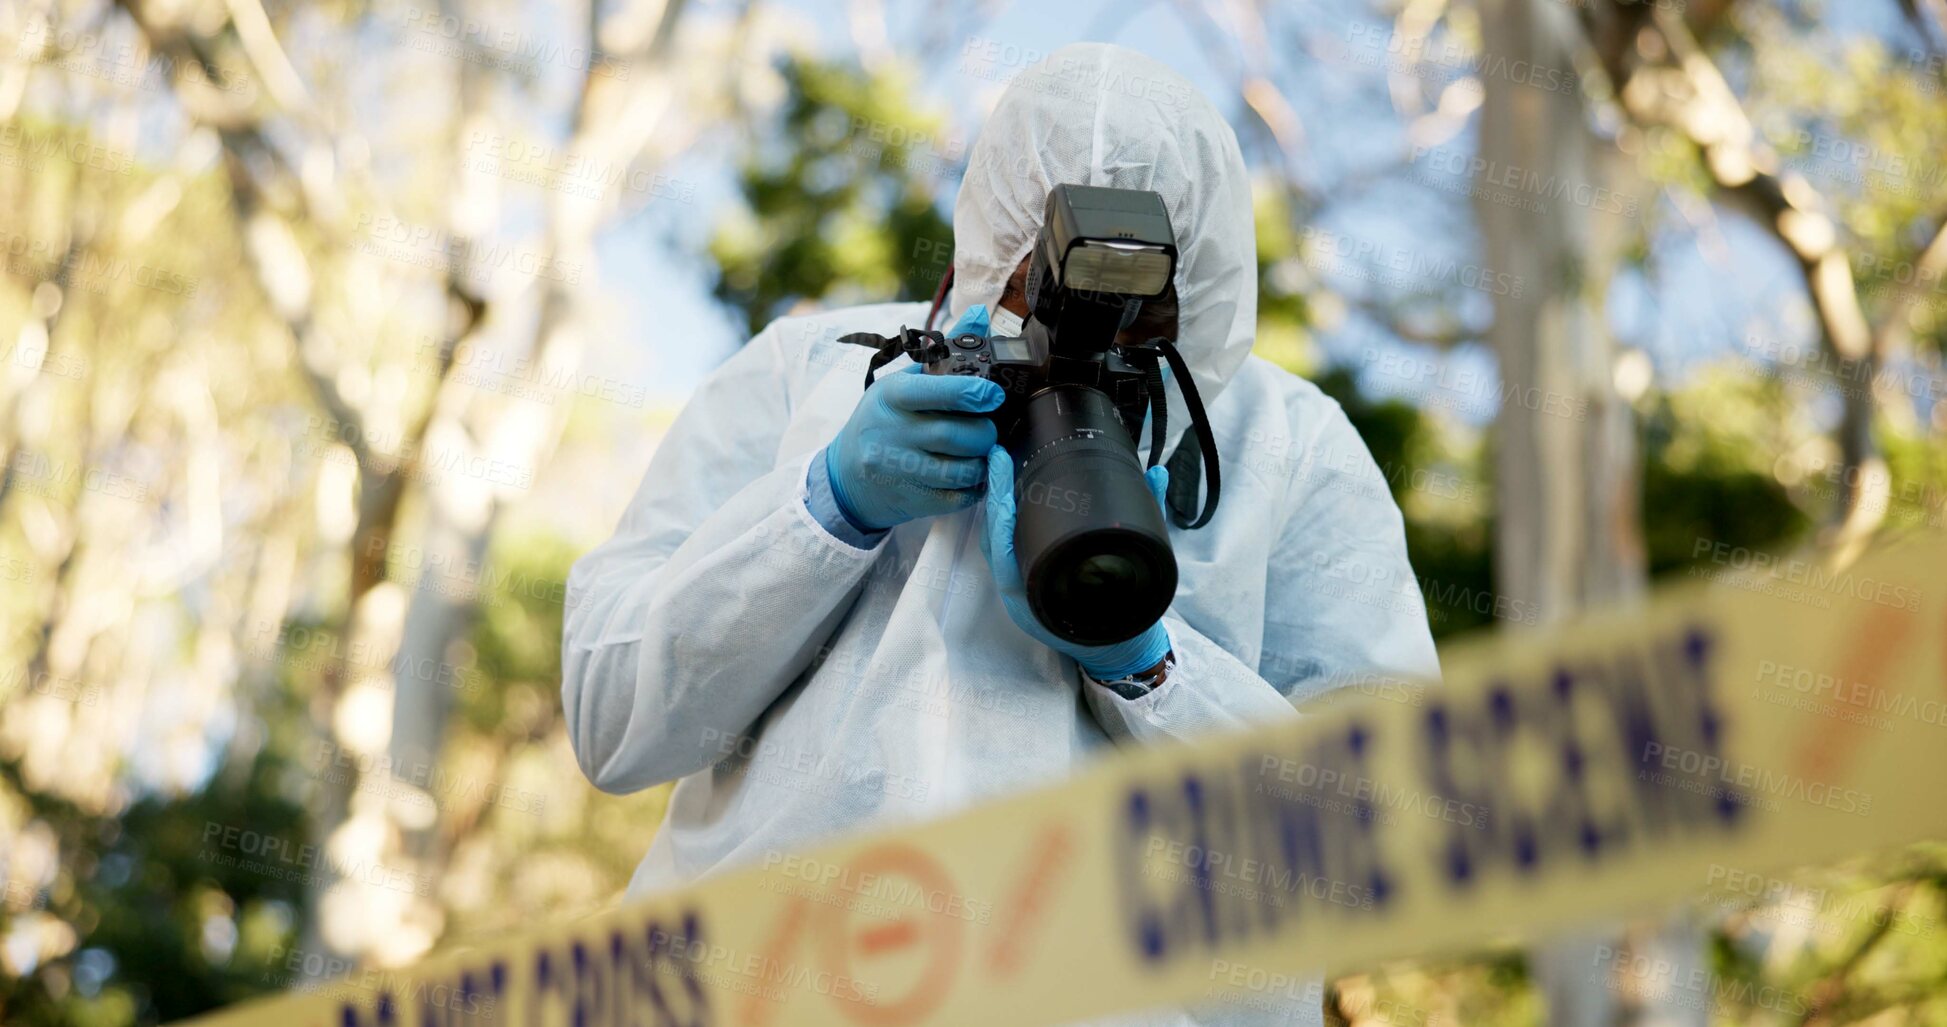 Buy stock photo Csi, photographer and police tape at crime scene for investigation in forest with evidence and safety hazmat.
Forensic quarantine, expert investigator and pictures for observation and case research